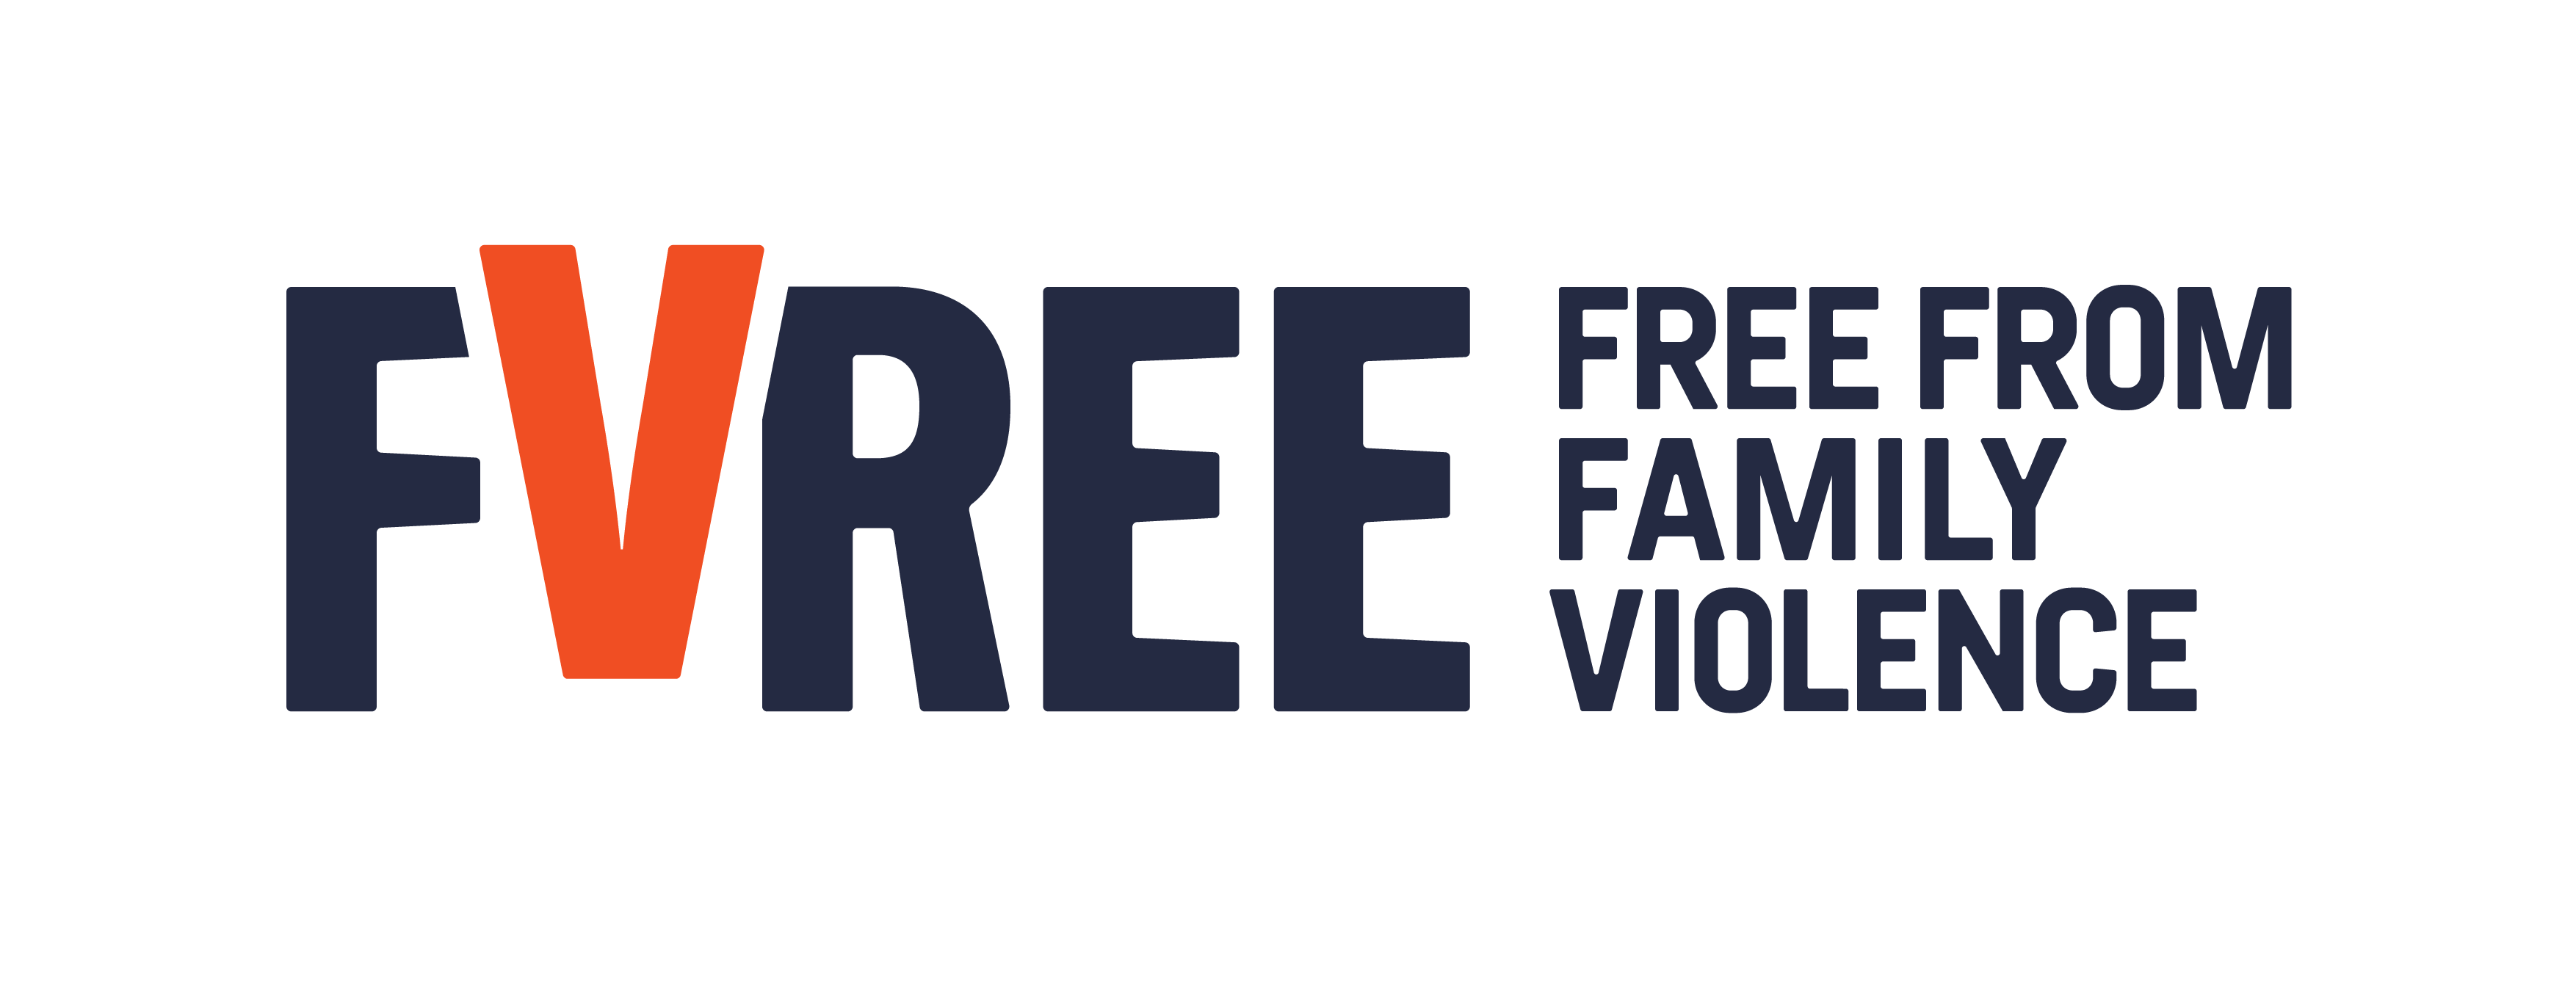 FVREE – Free From Family Violence